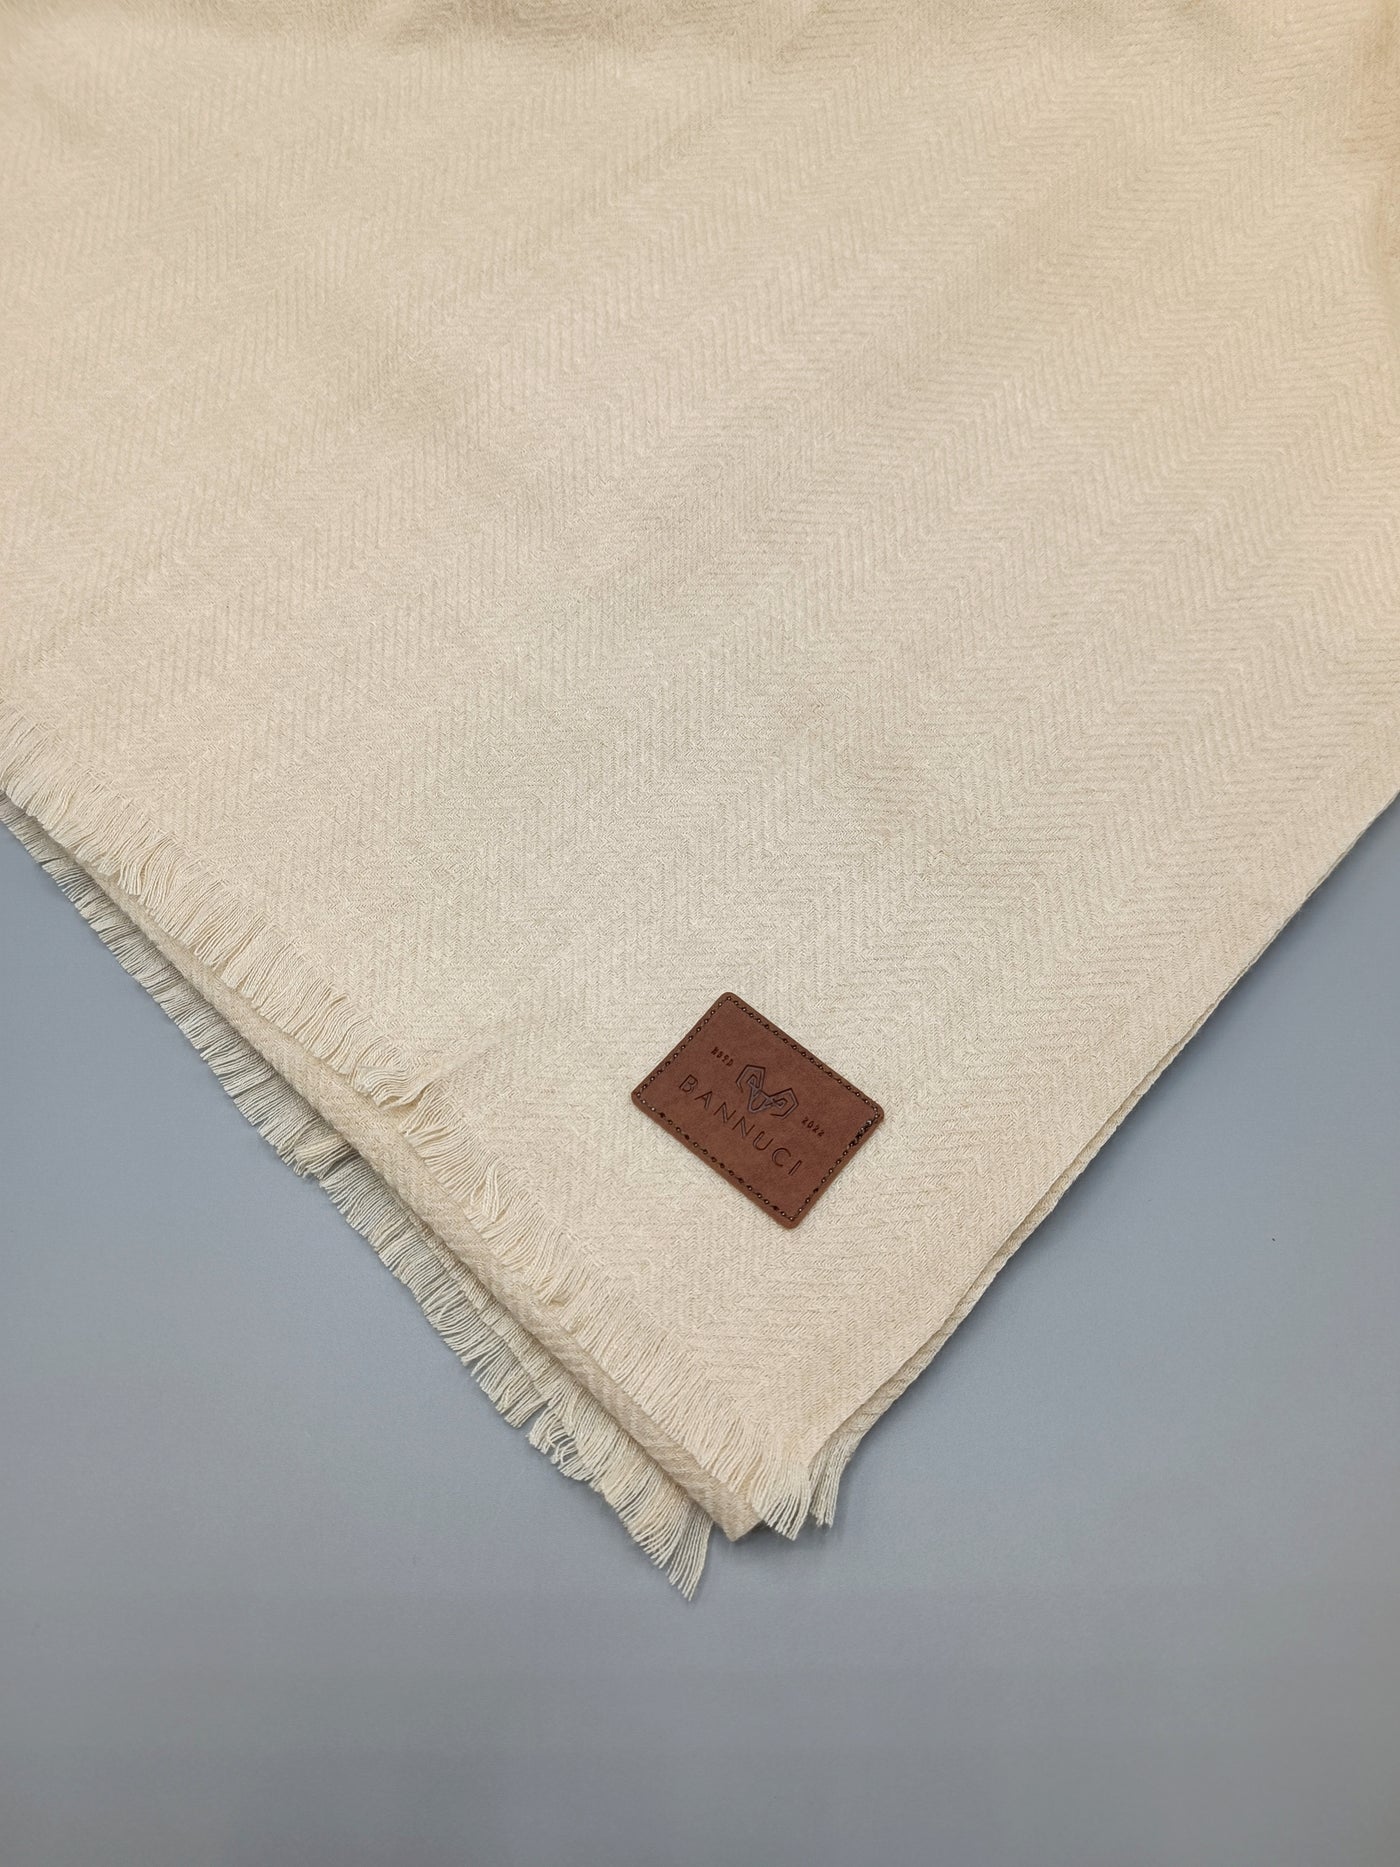 Premium Quality Extremely Soft Light Beige Color Pashmina Cashmere Shawl for Men